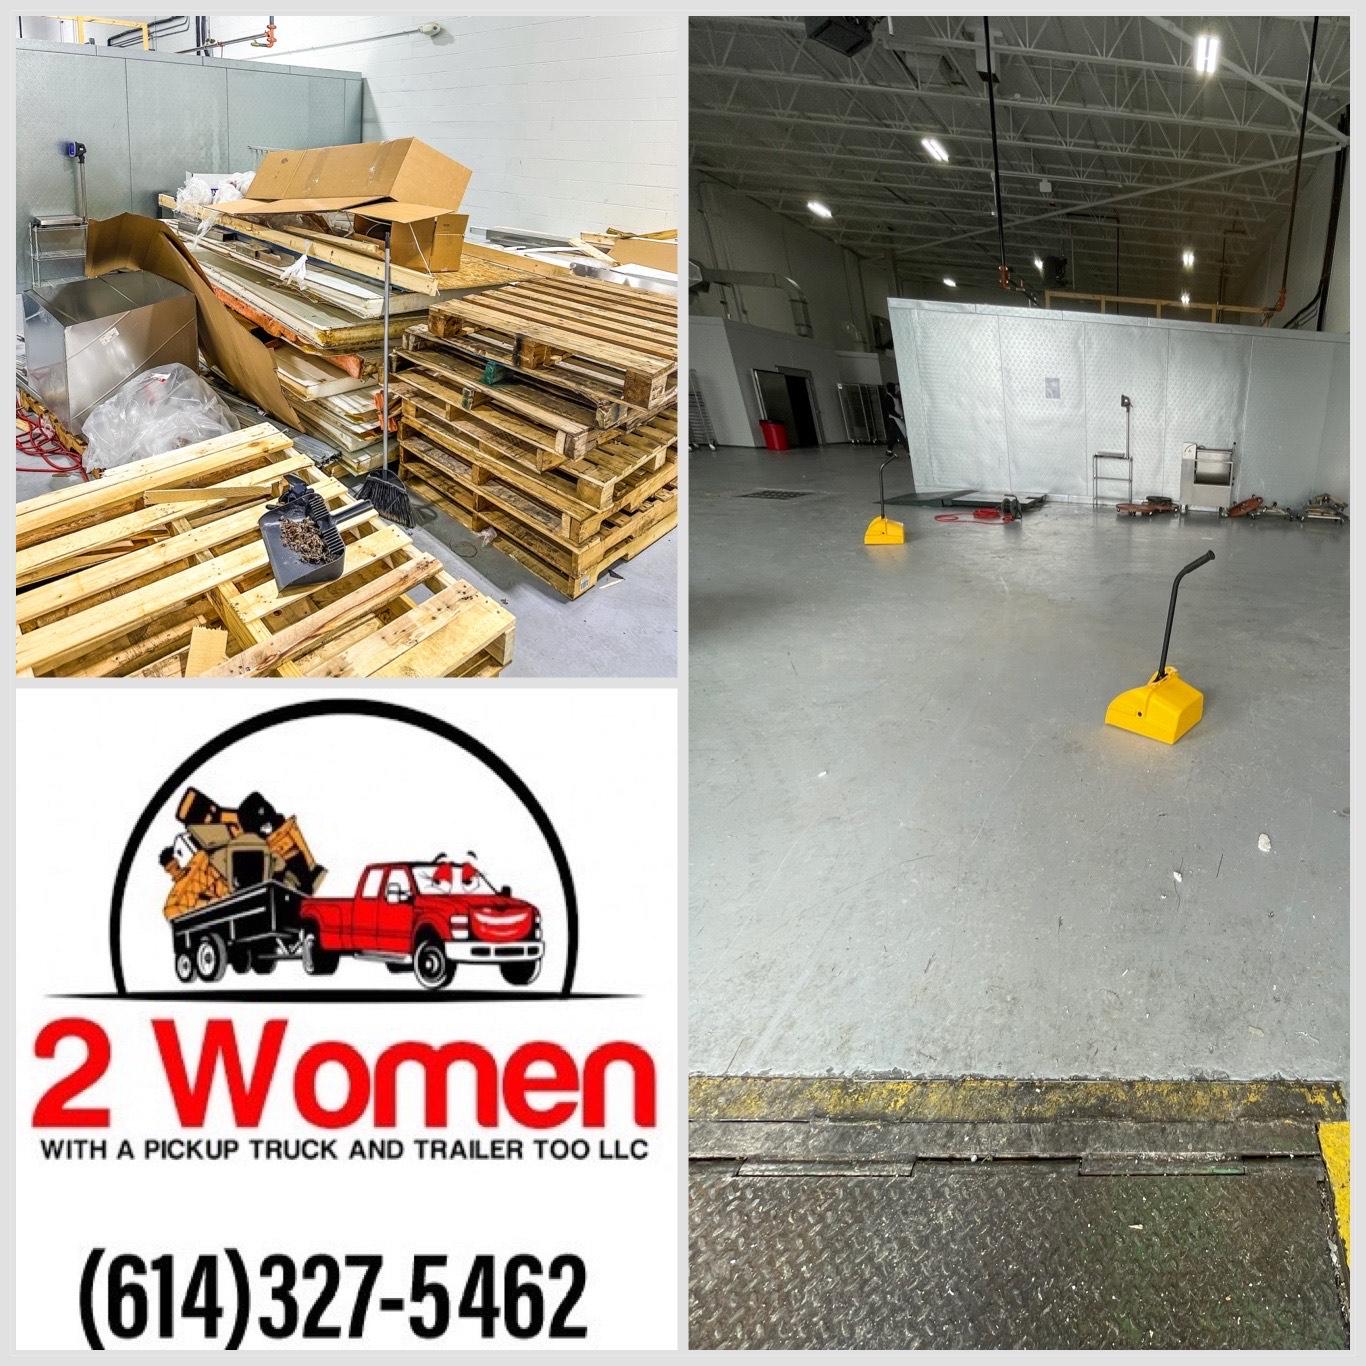 2 Women With A Pickup Truck And Trailer Too LLC Columbus (614)327-5462